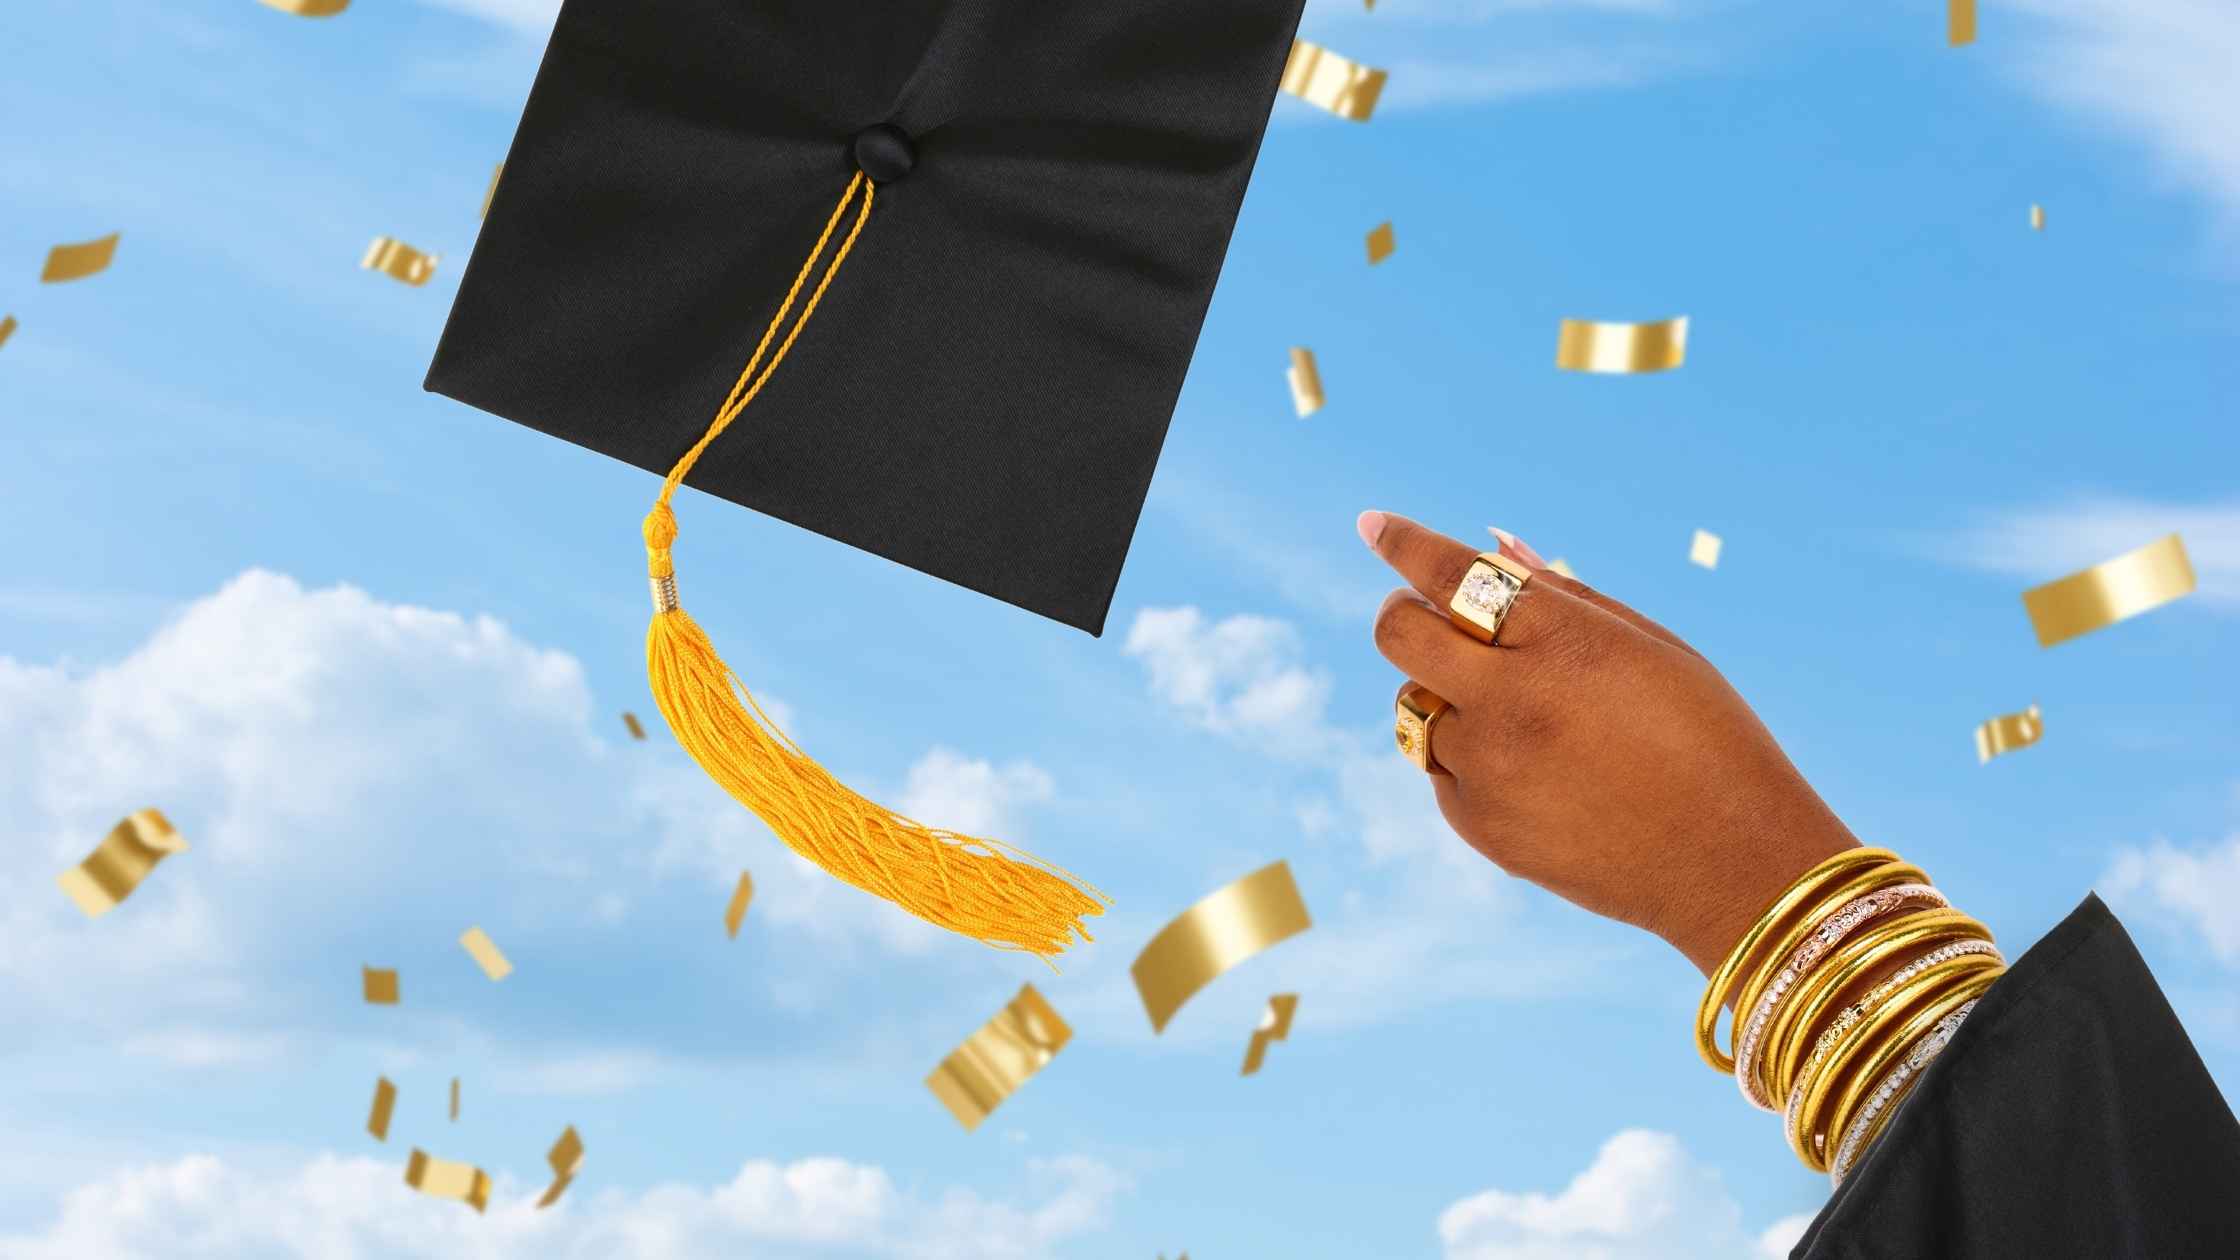 Why is Graduation important?